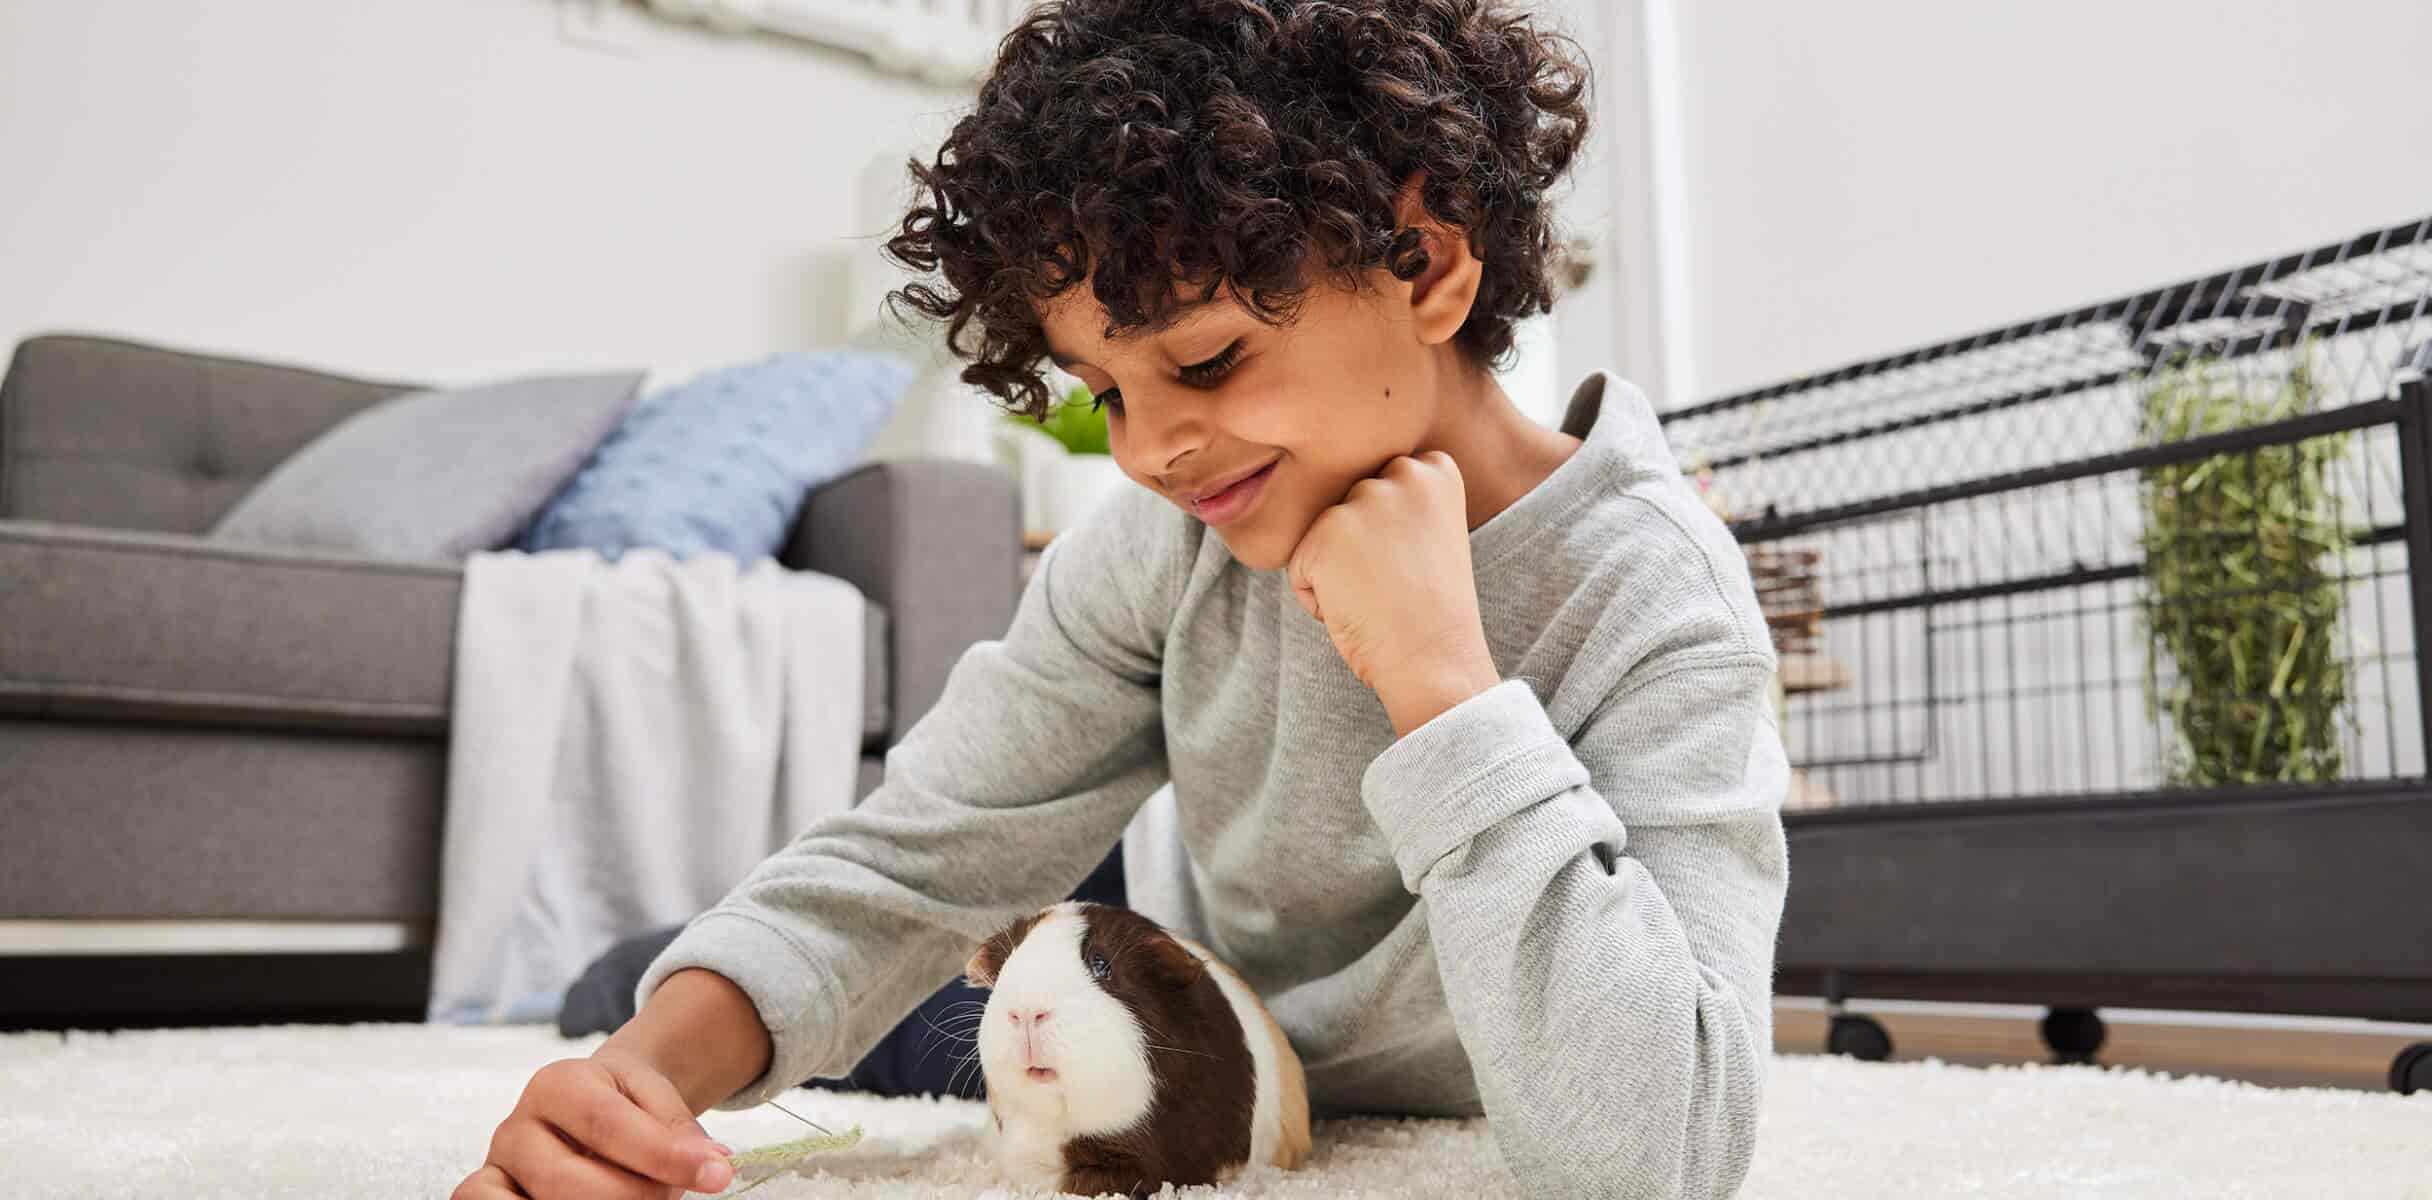 Celebrate milestones with your pet for lasting memories - A guinea pig sitting in front of a kid